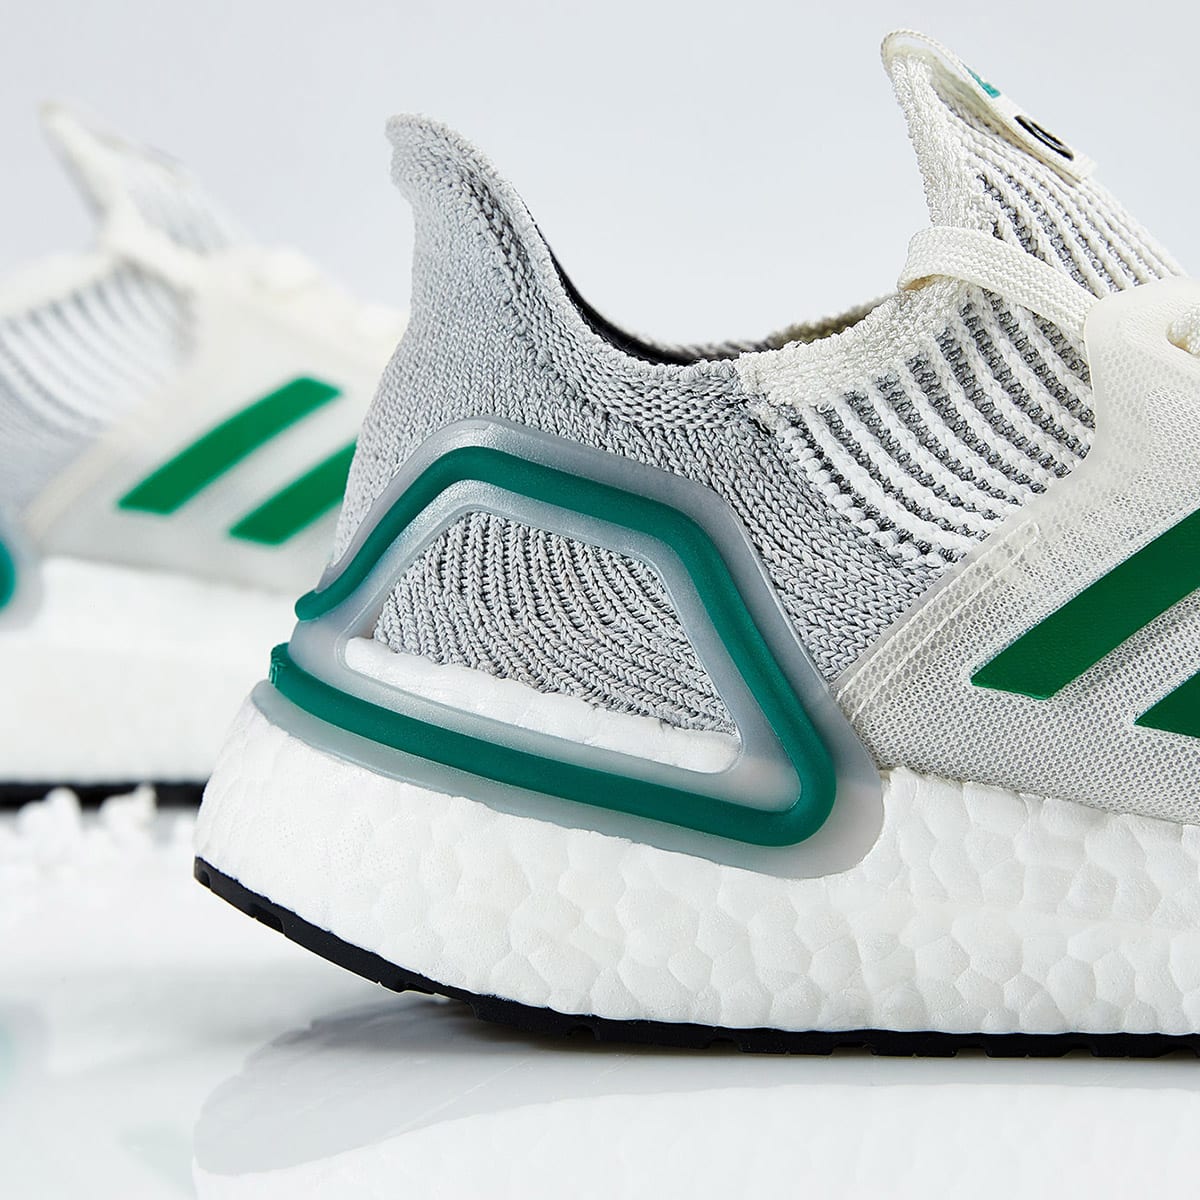 Adidas Ultraboost 19 (EQT) | END. Launches